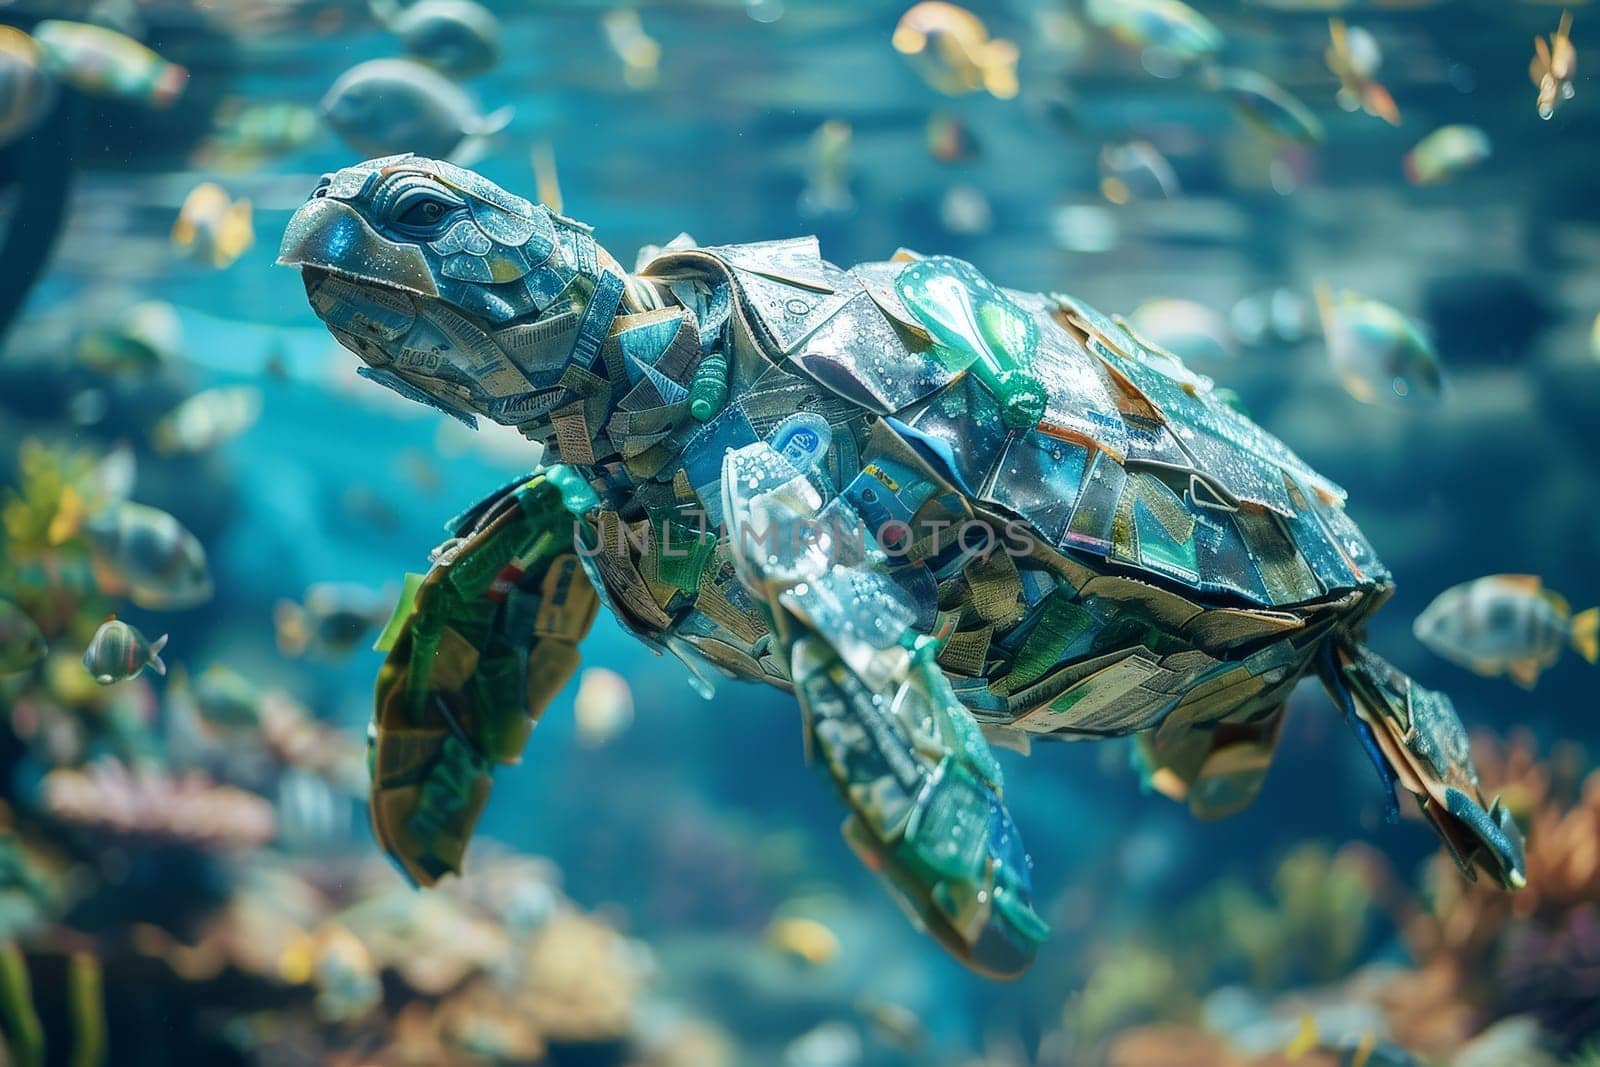 Plastic Pollution In Ocean, a turtle made of plastic bottles, cups and trash swimming in the sea by nijieimu